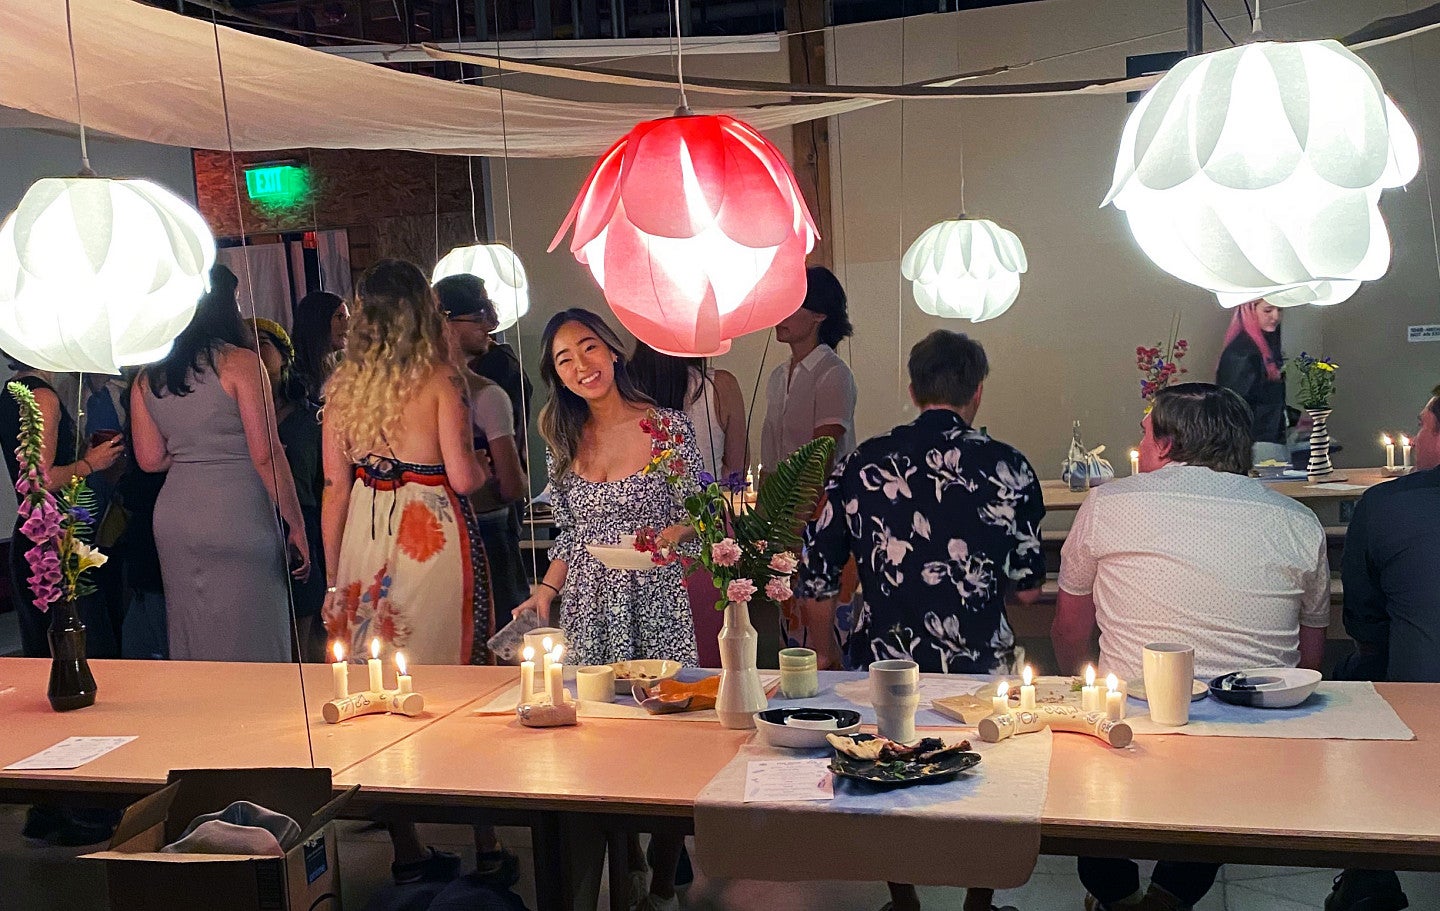 Kiera and classmates at a formal party surrounded by colorful, unique lighting fixtures